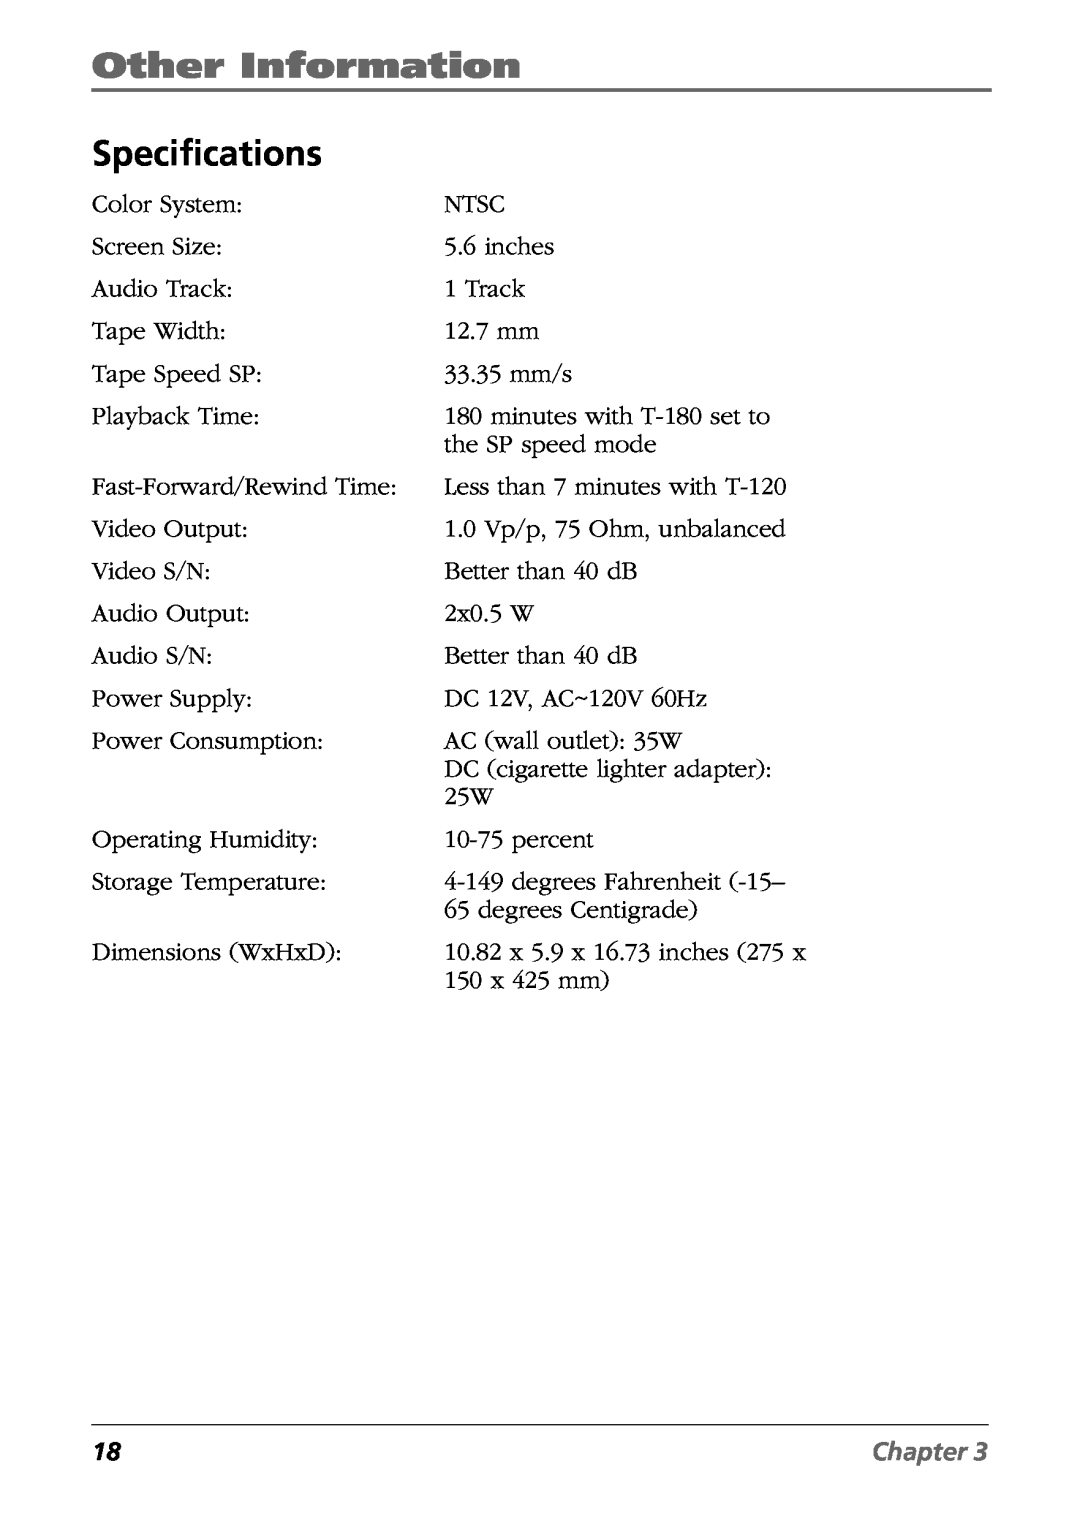 RCA Mobile Video Cassette Player manual Specifications, Other Information, Chapter 